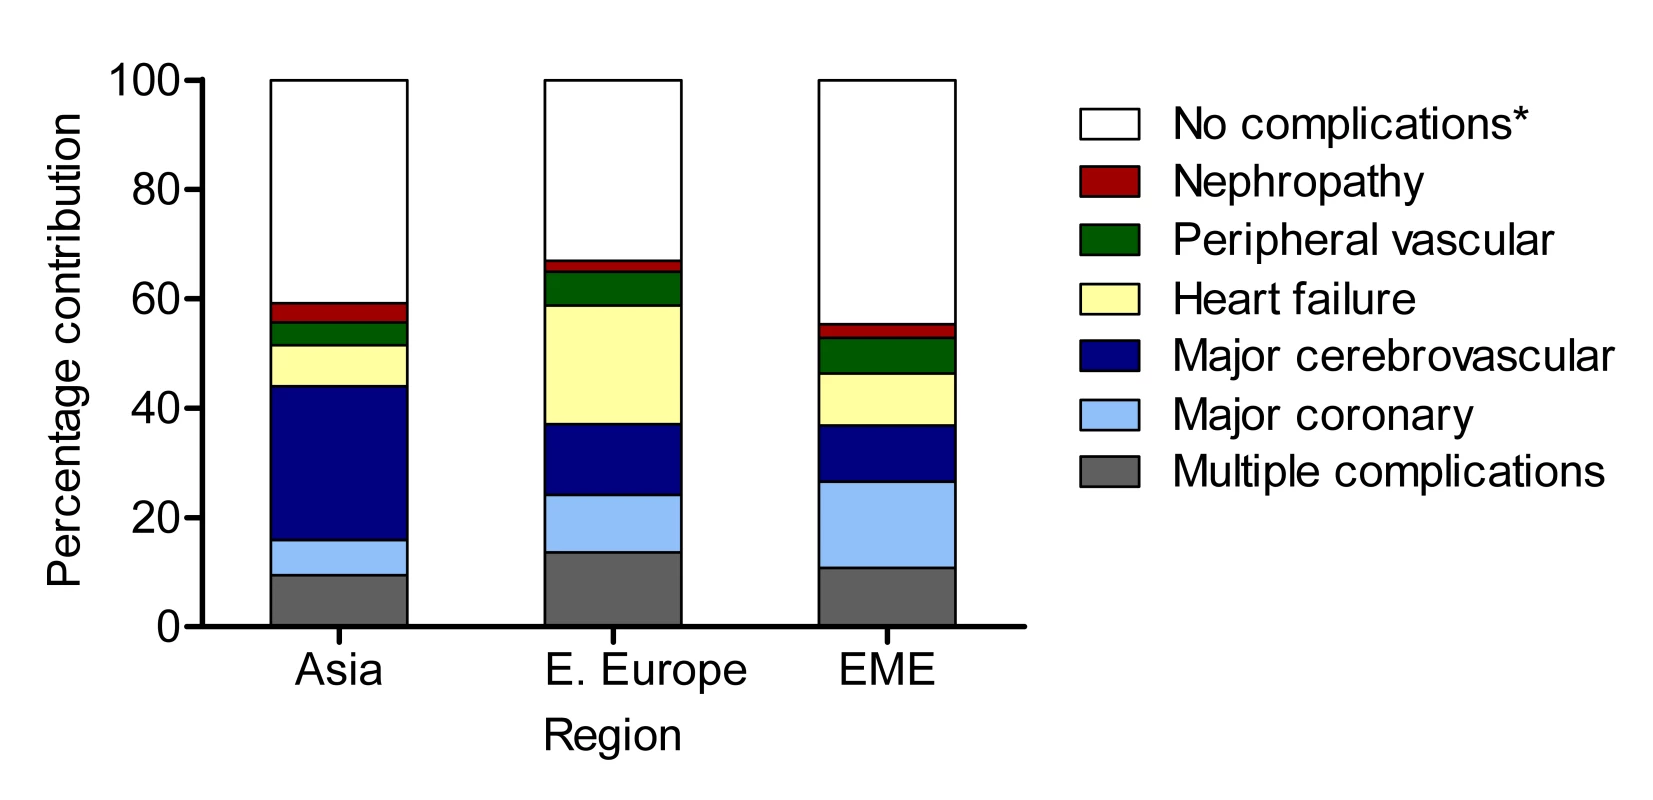 Contributions of specific complications to total hospital use during the ADVANCE study, by region.